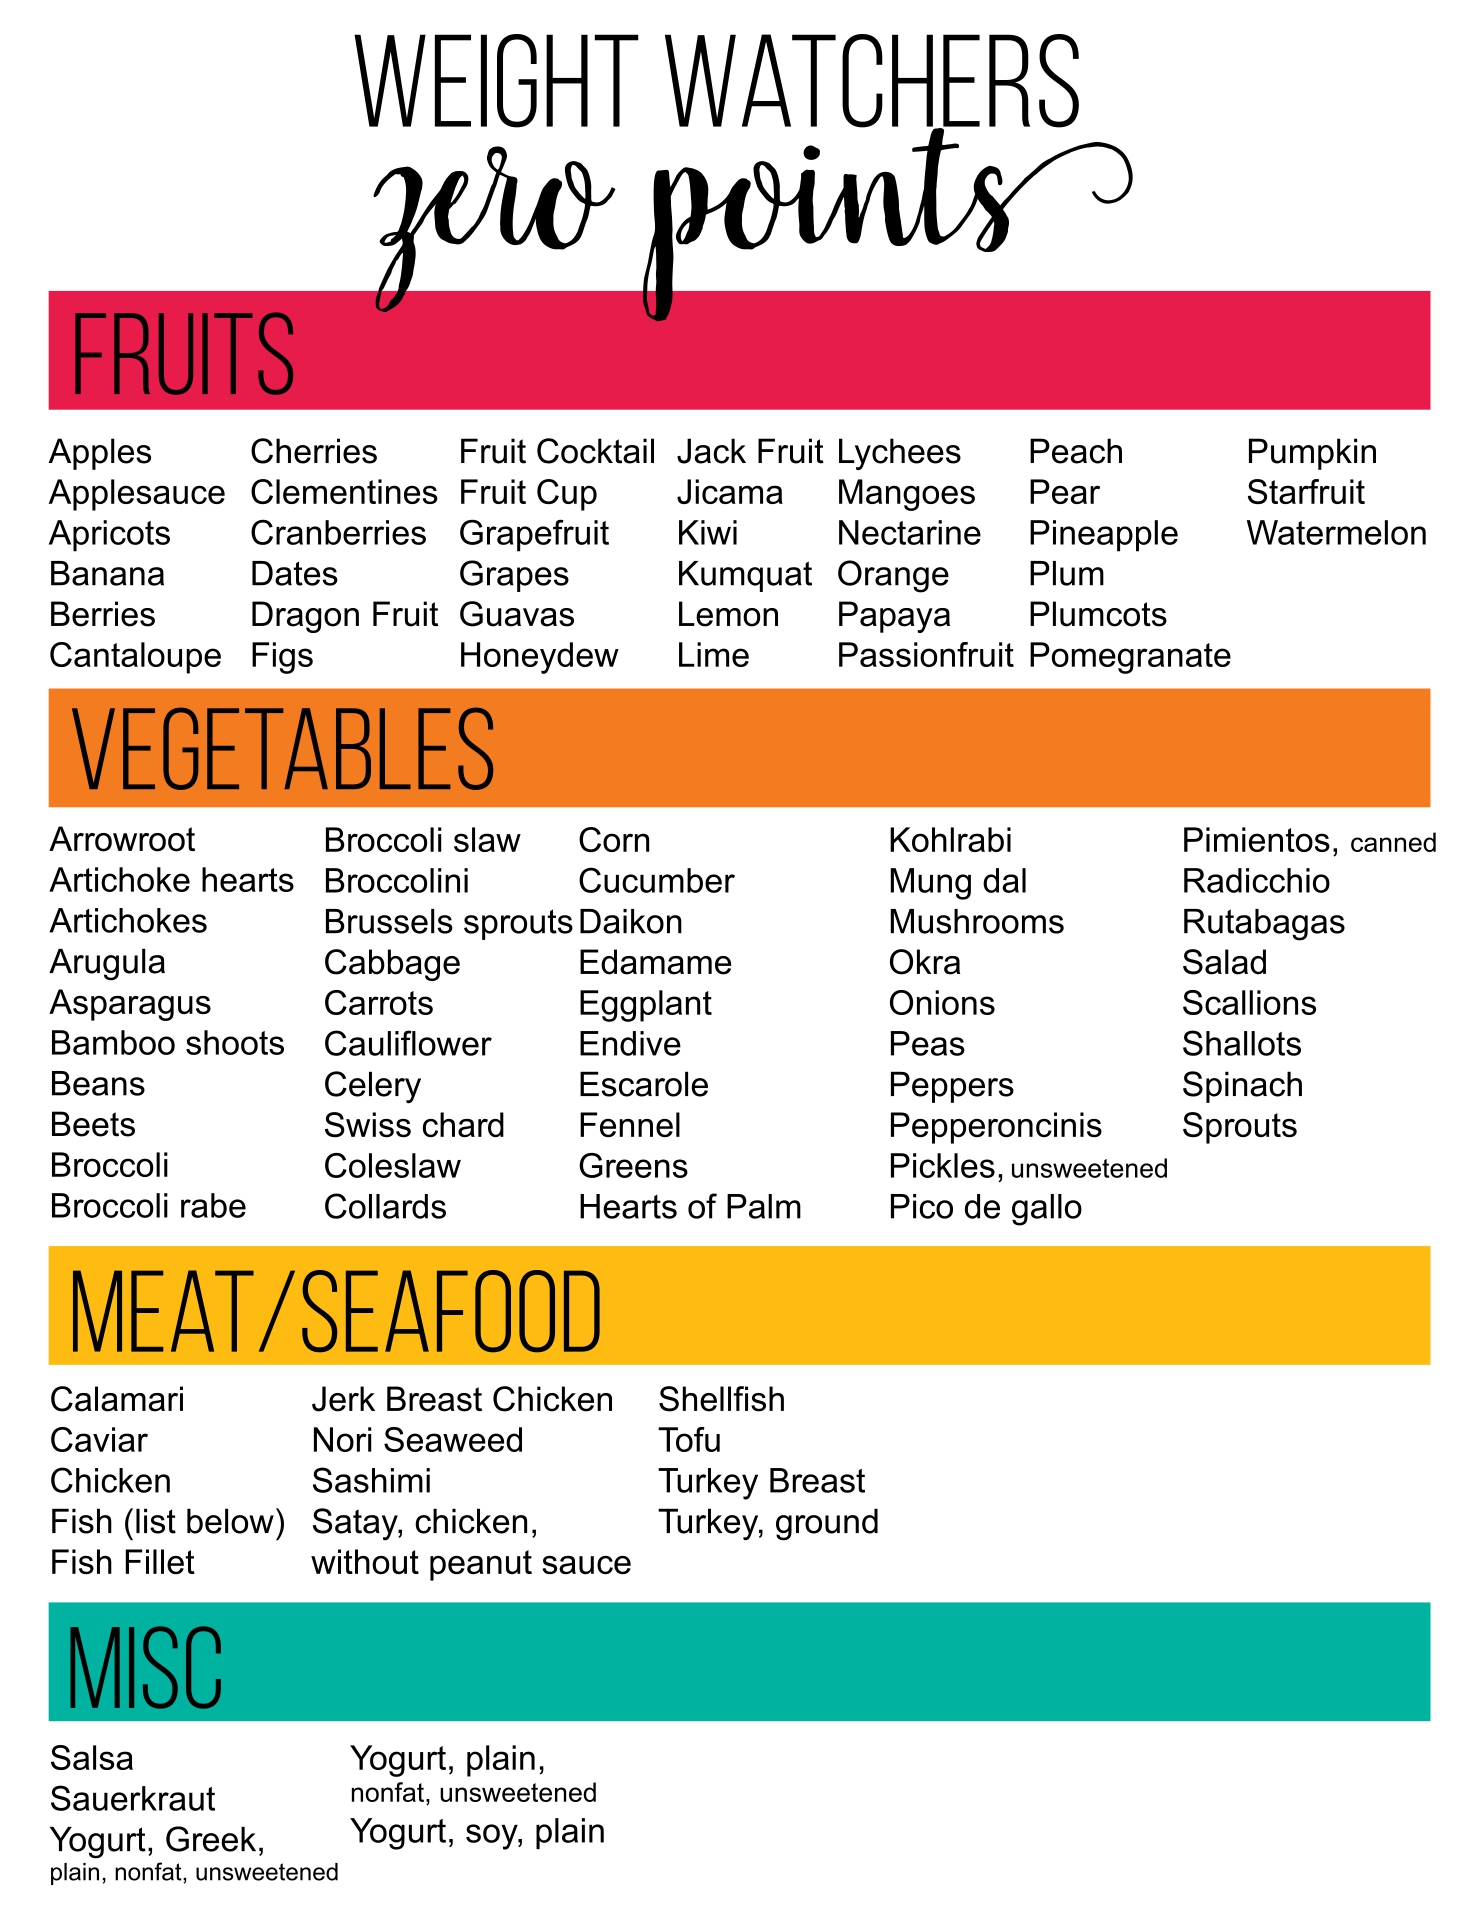 printable-weight-watchers-old-points-food-list-printable-templates